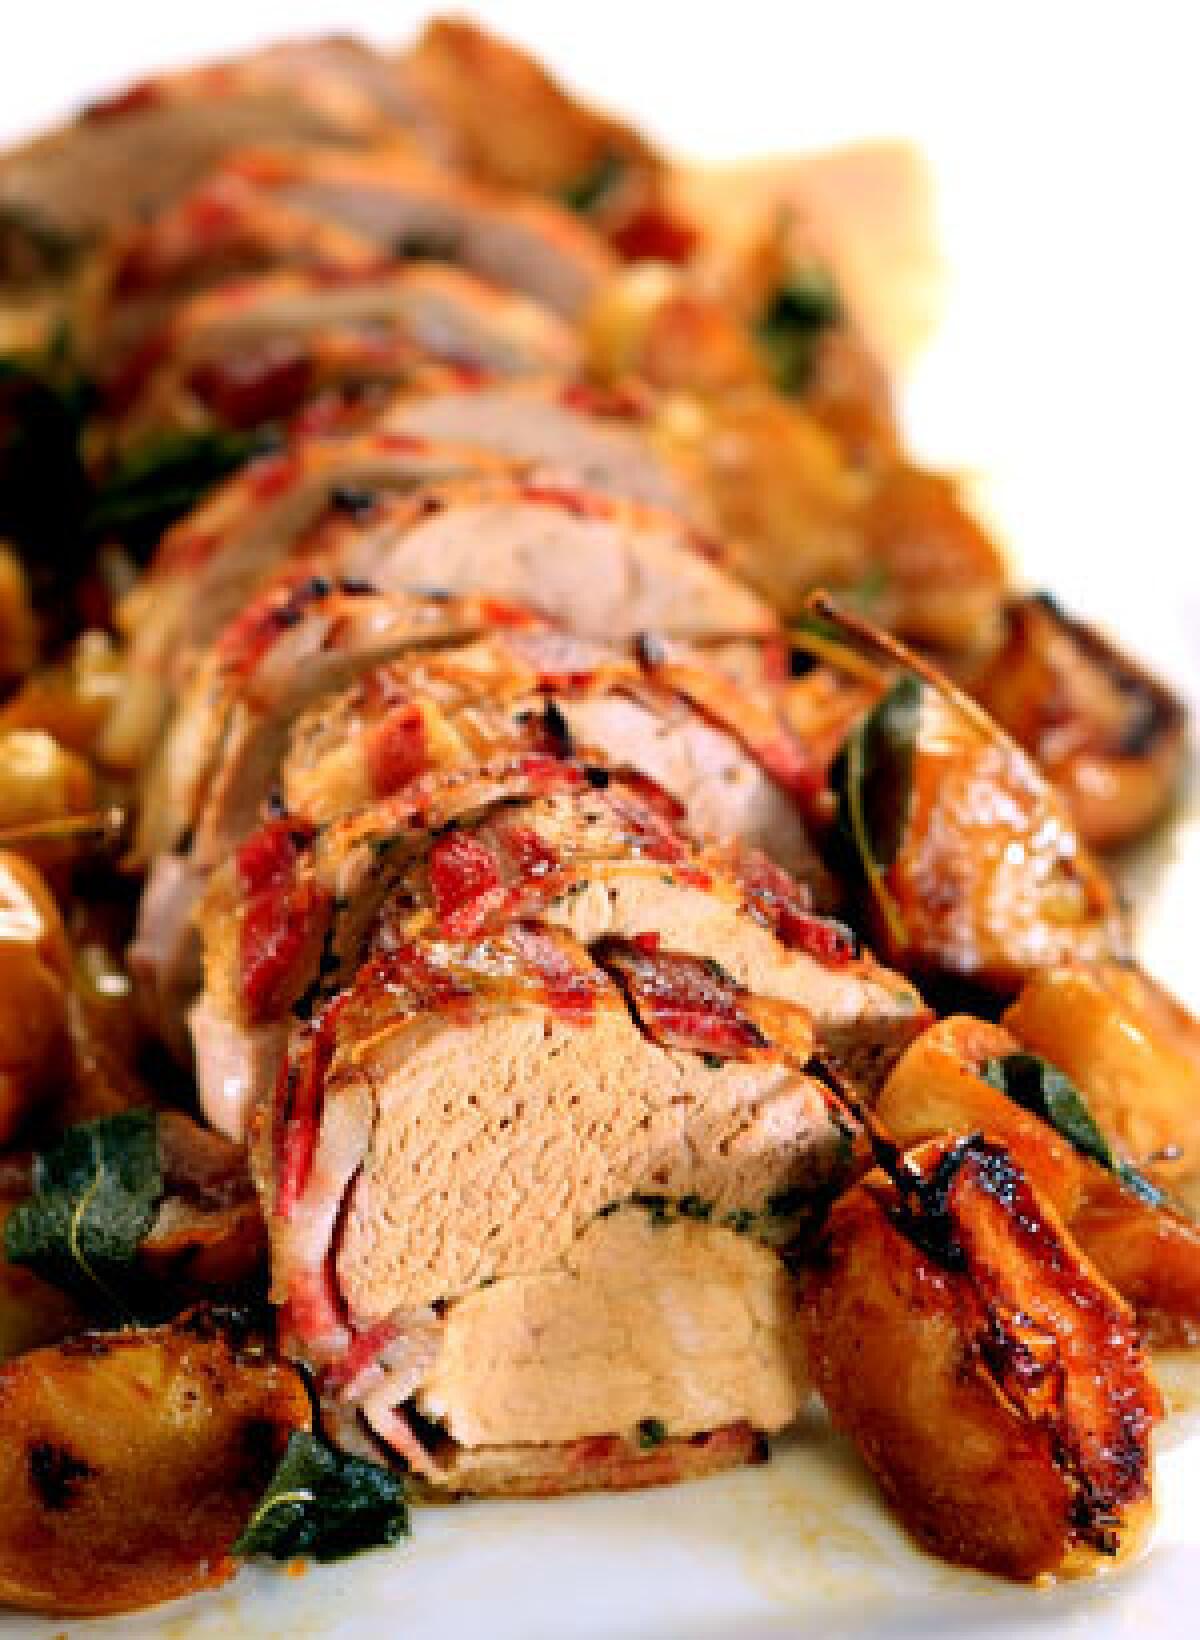 IT'S A WRAP: Bacon-wrapped pork loin with roasted apples.